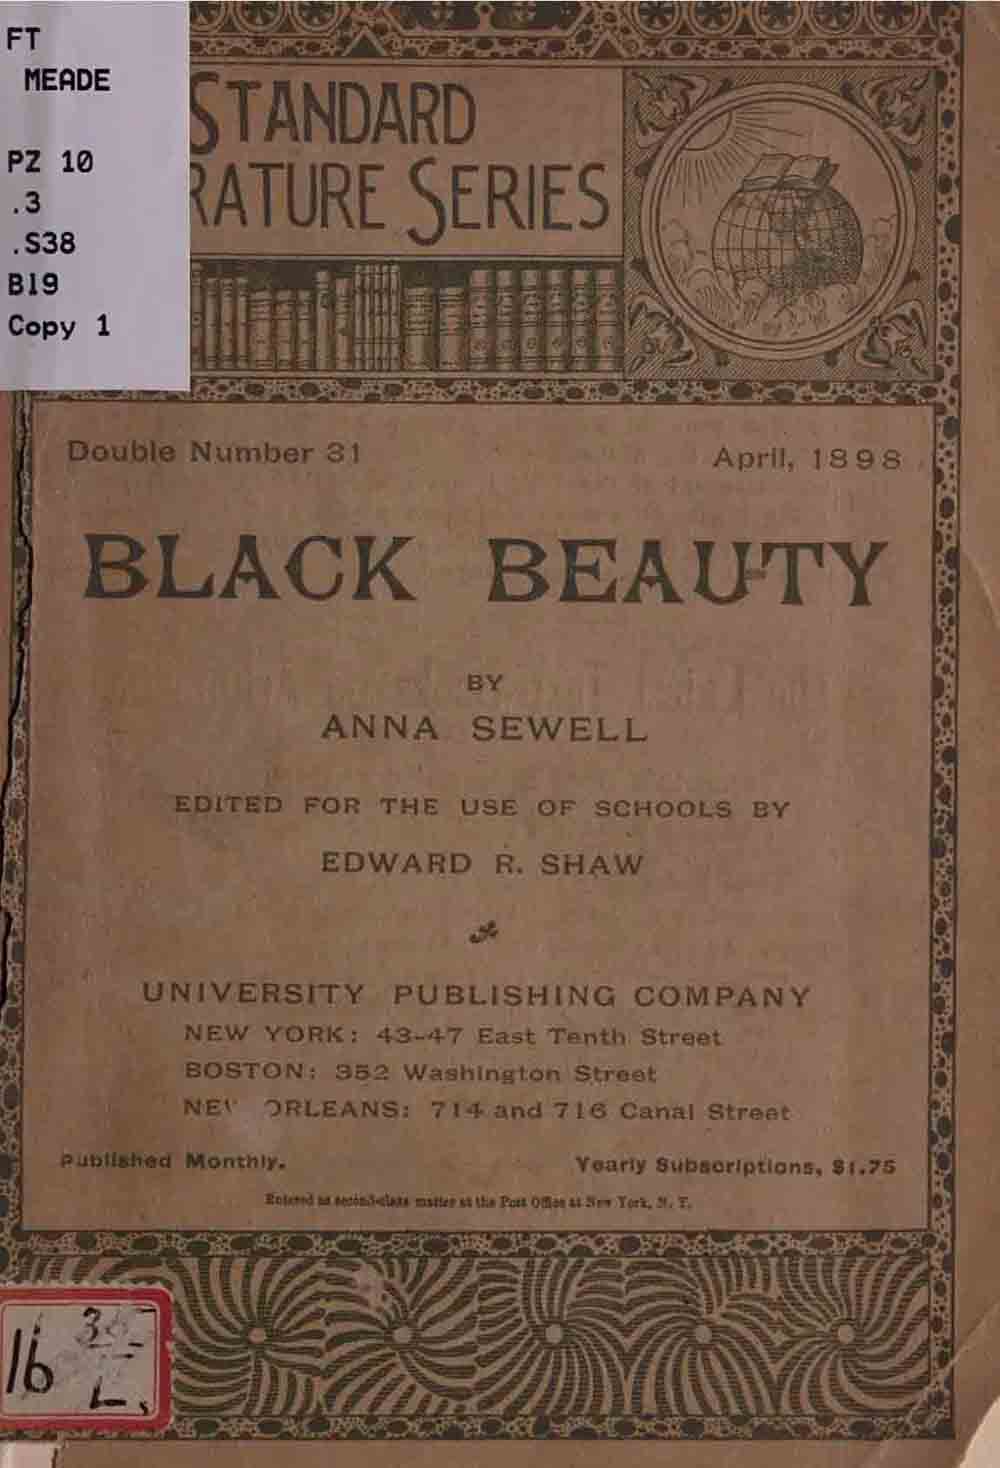 Black Beauty Book Cover 1898 Anna Sewell